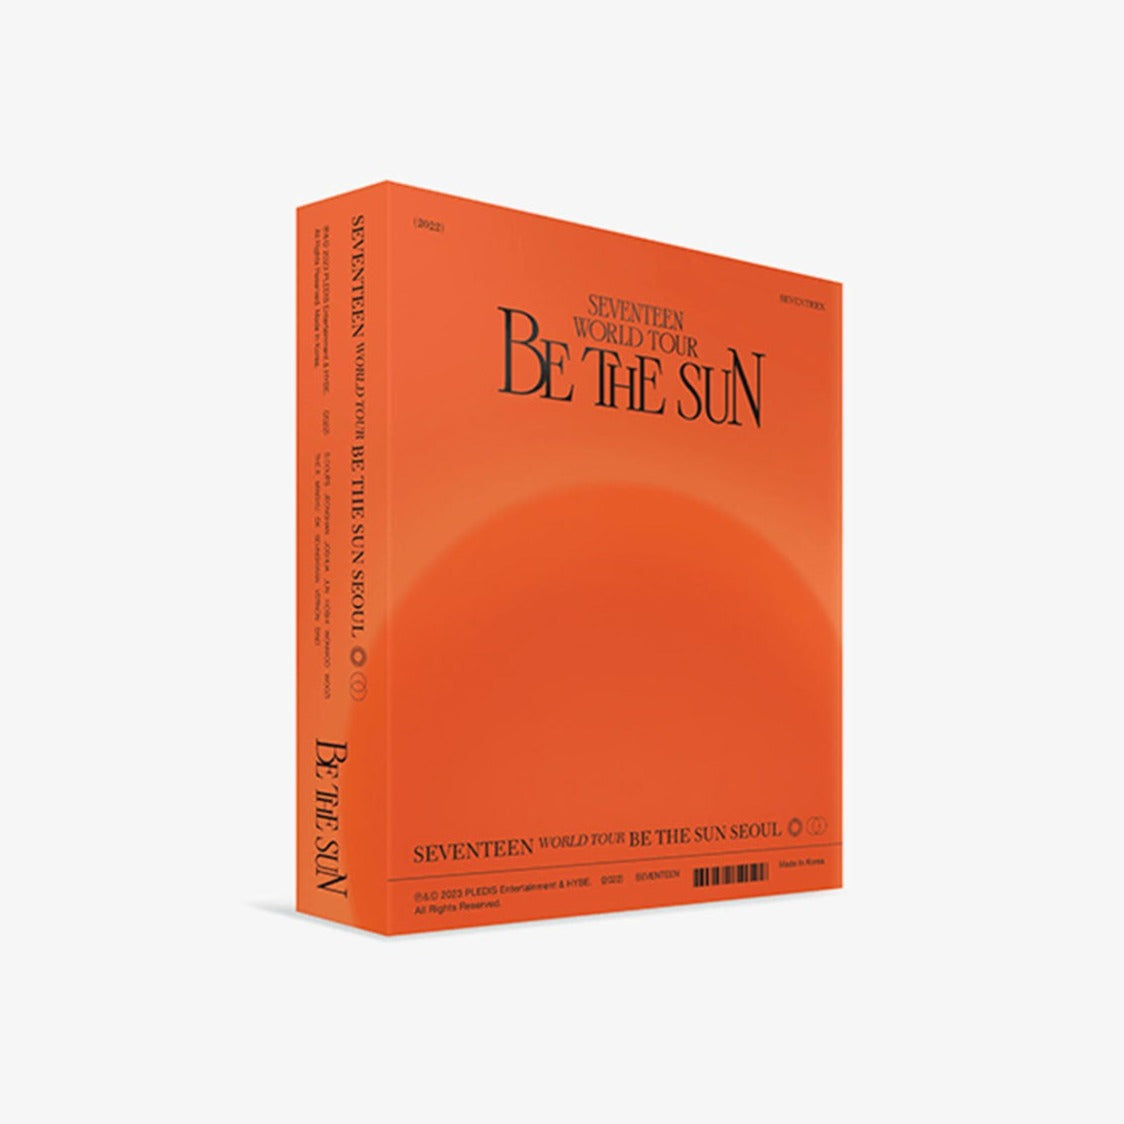 SEVENTEEN WORLD TOUR IN SEOUL 'BE THE SUN' (DVD) COVER